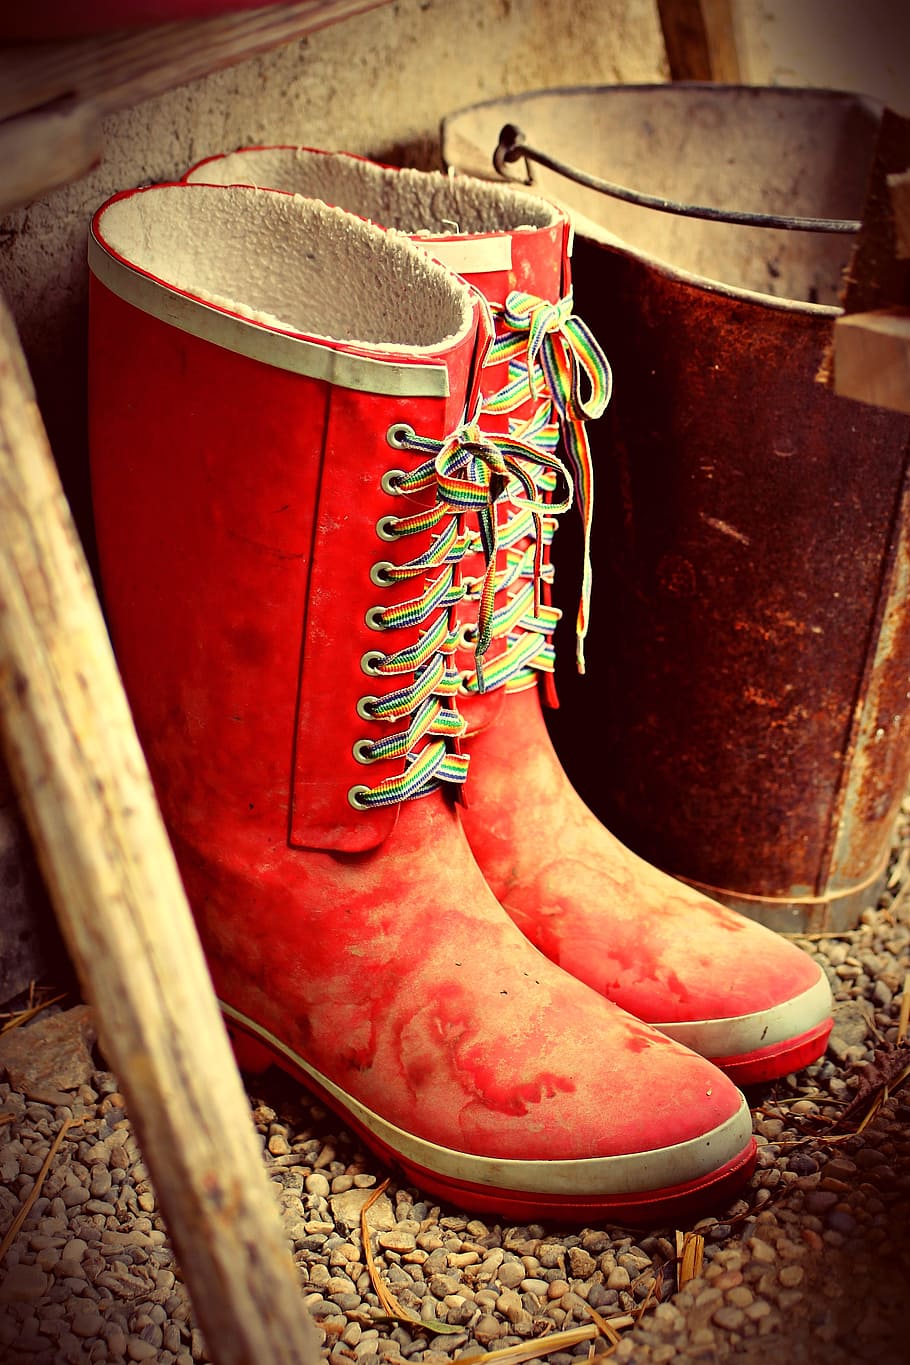 rustic, village life, bad weather, boots, wellingtons, red, color, bucket, yard, farm